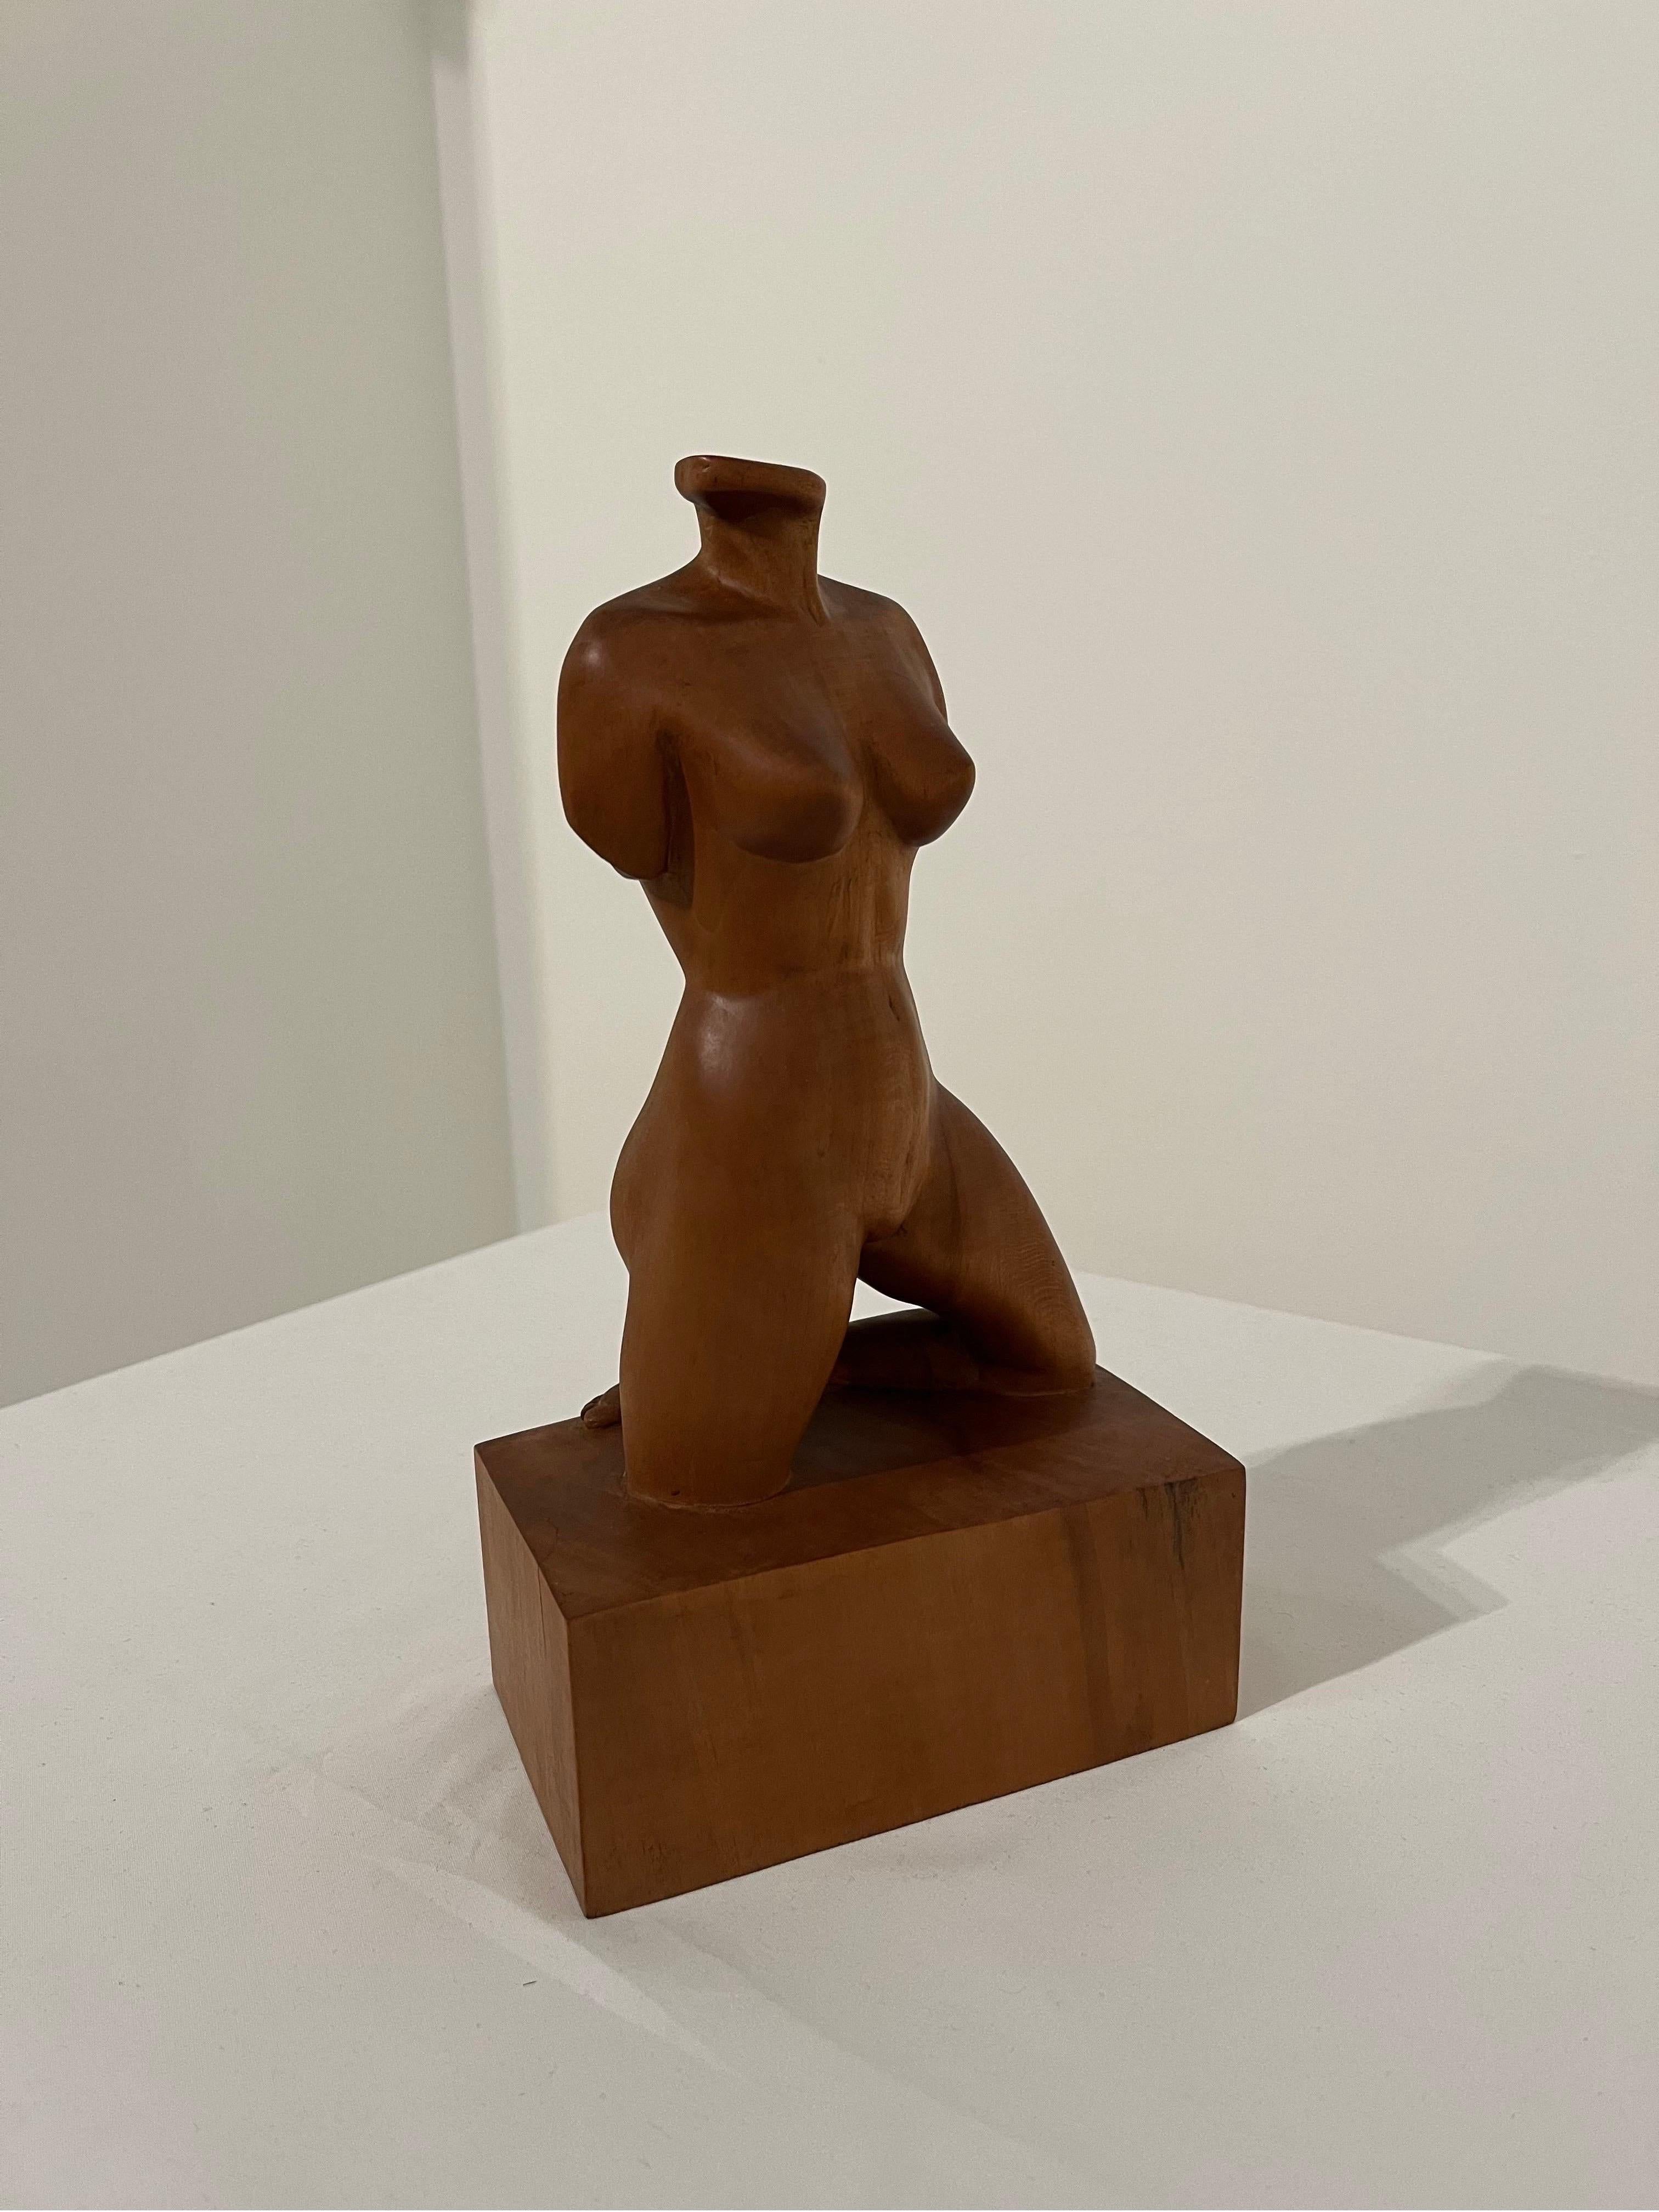 Excellent Classic Carving of Female Nude Pose
Incredible detail, great scale. 
Unsigned. 
From around 1960s